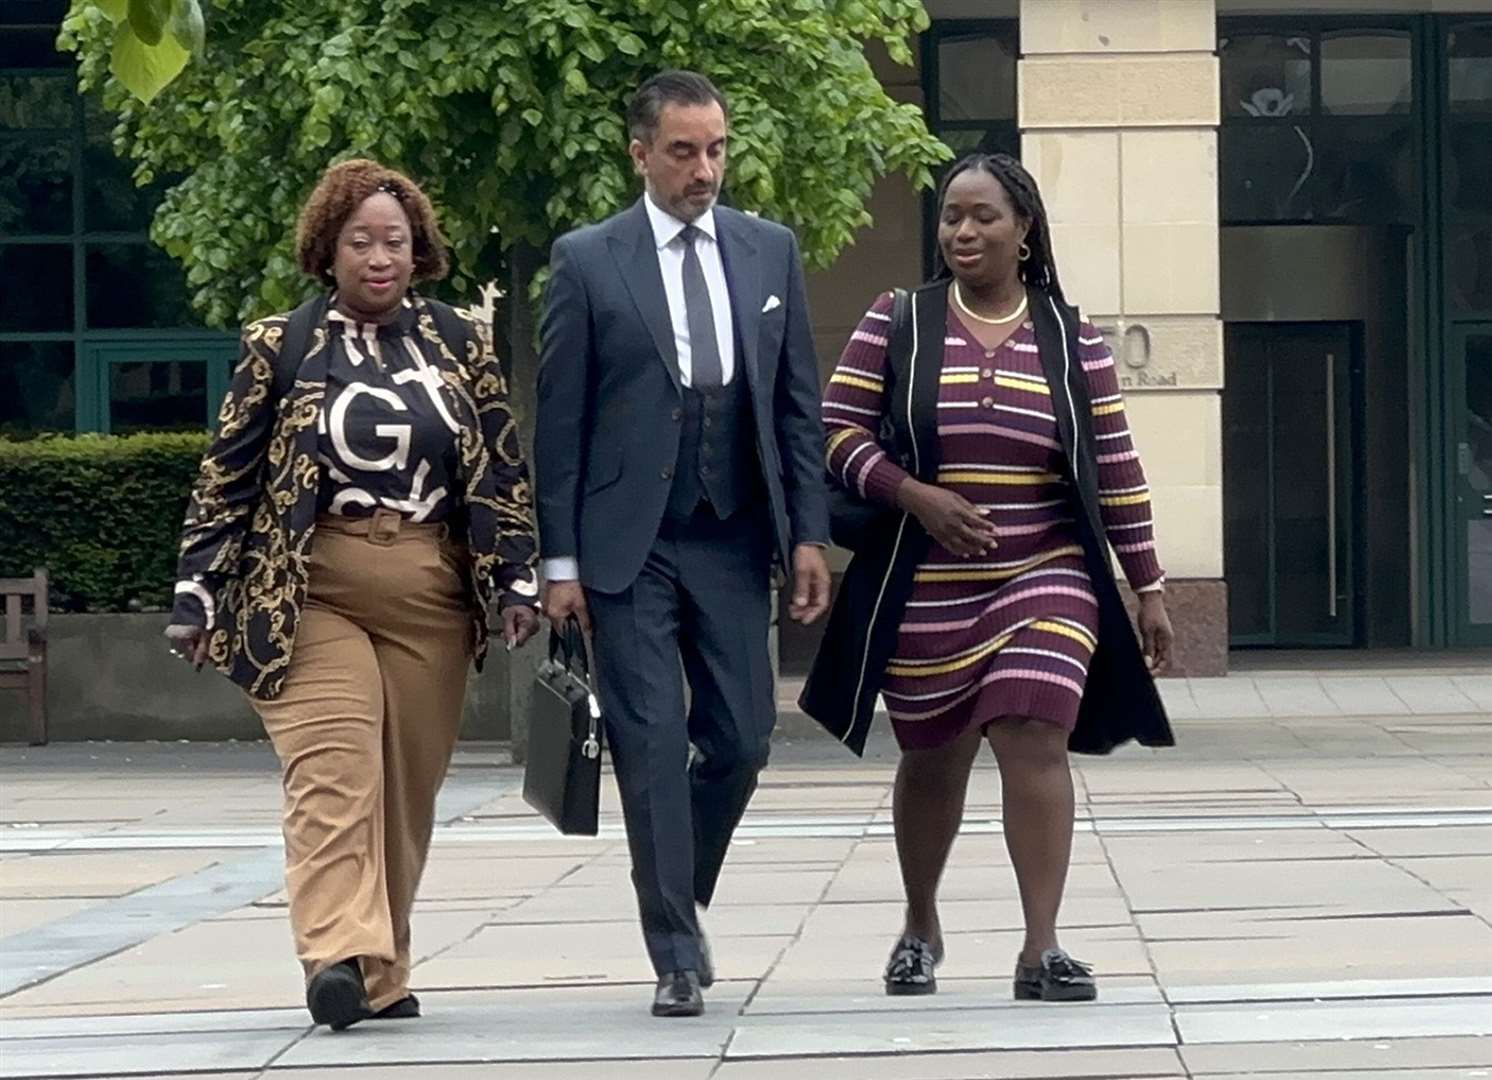 Lawyer Aamer Anwar with members of Sheku Bayoh’s family arriving at the inquiry on Friday (Dan Barker/PA)